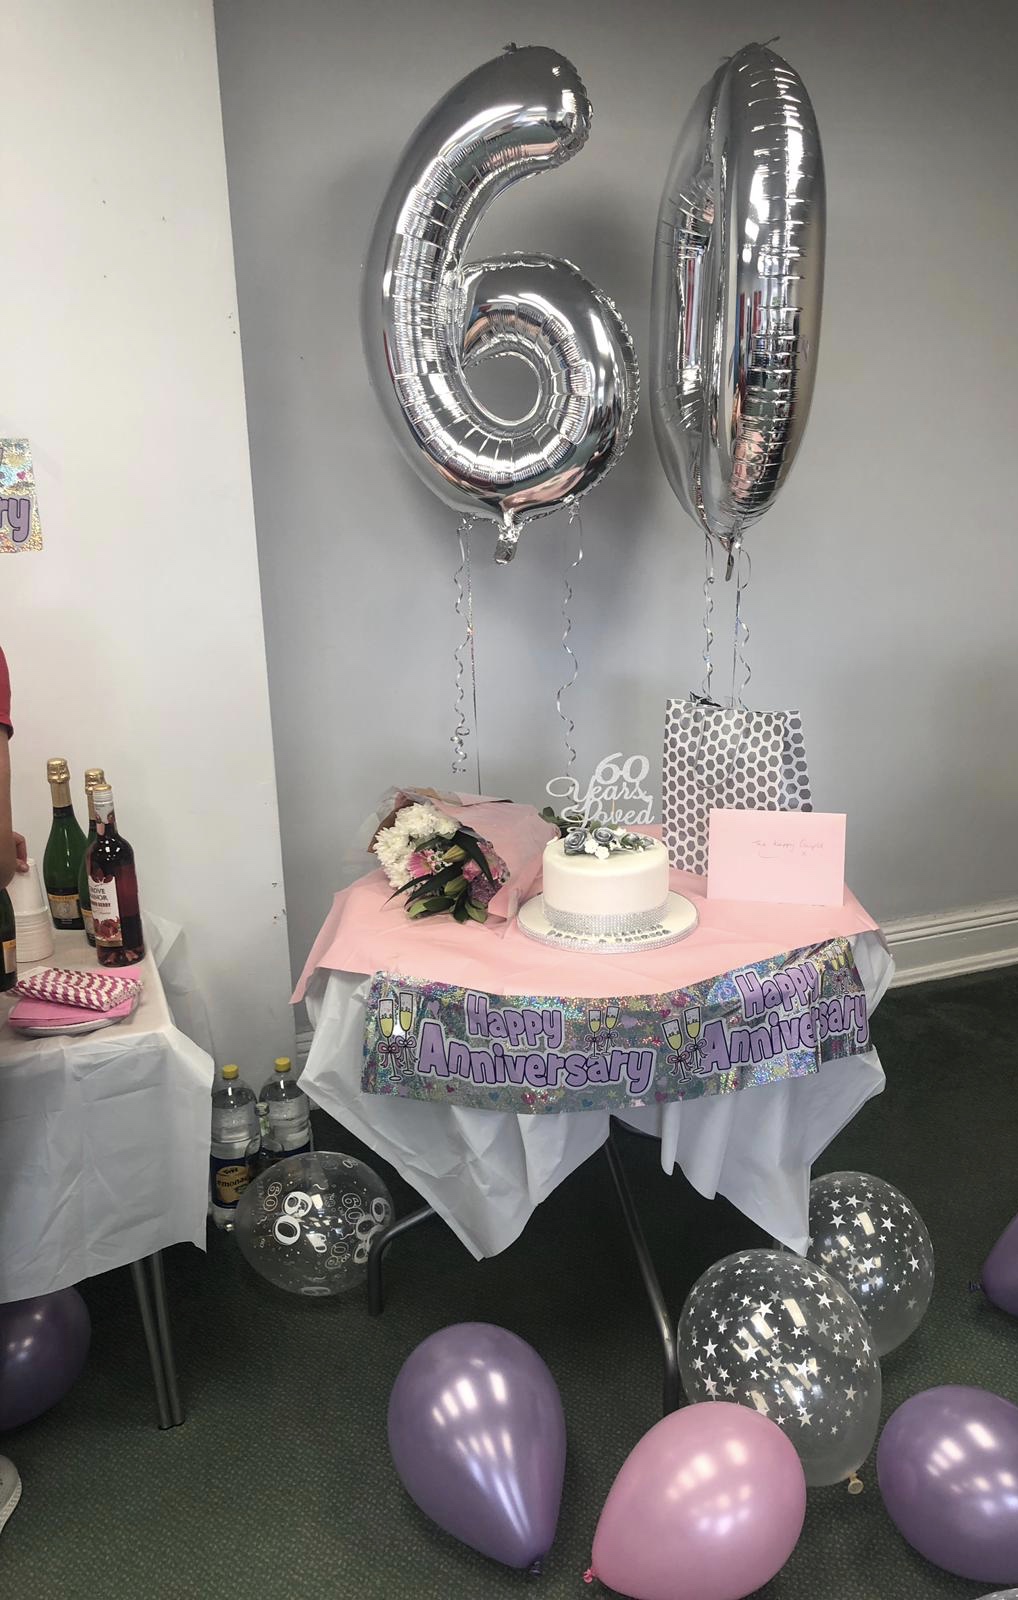 Diamond Wedding Anniversary celebrations at Victoria House Care Centre: Key Healthcare is dedicated to caring for elderly residents in safe. We have multiple dementia care homes including our care home middlesbrough, our care home St. Helen and care home saltburn. We excel in monitoring and improving care levels.